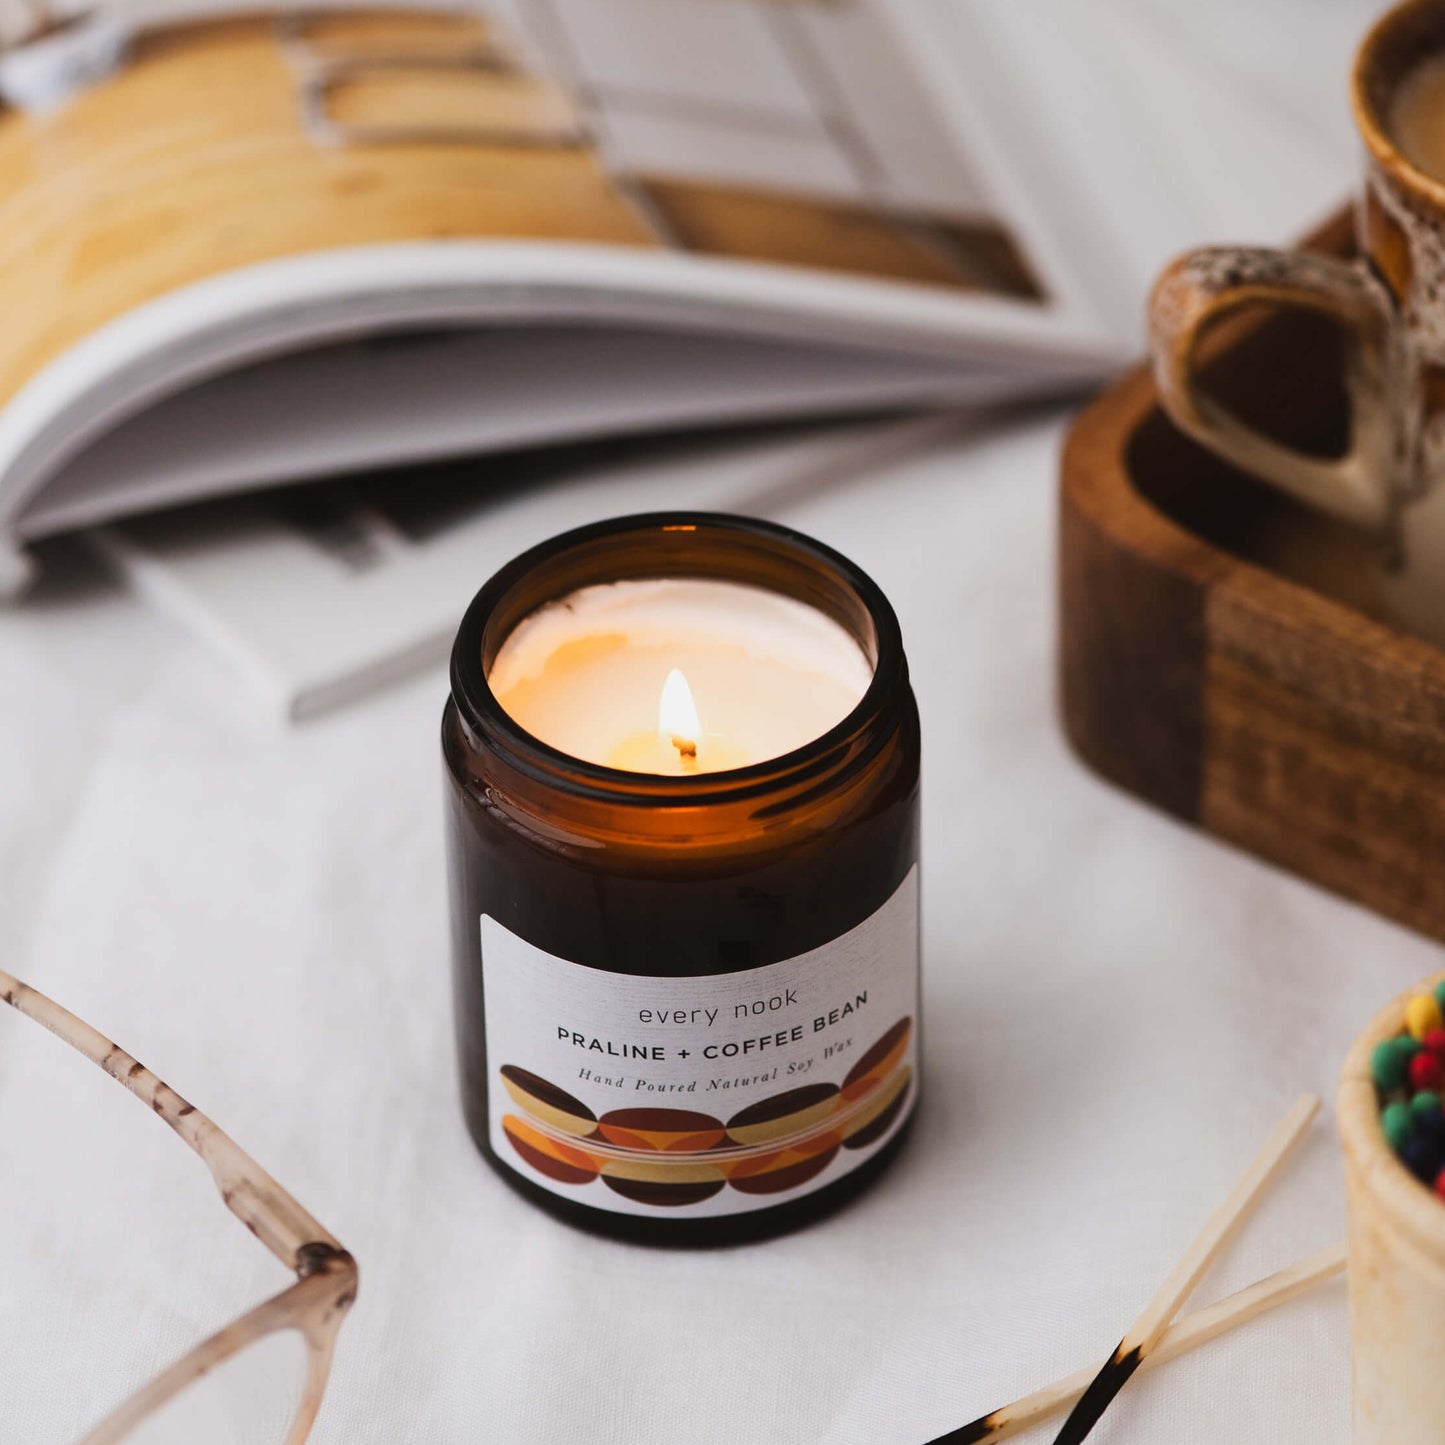 Praline + Coffee Bean scented candle